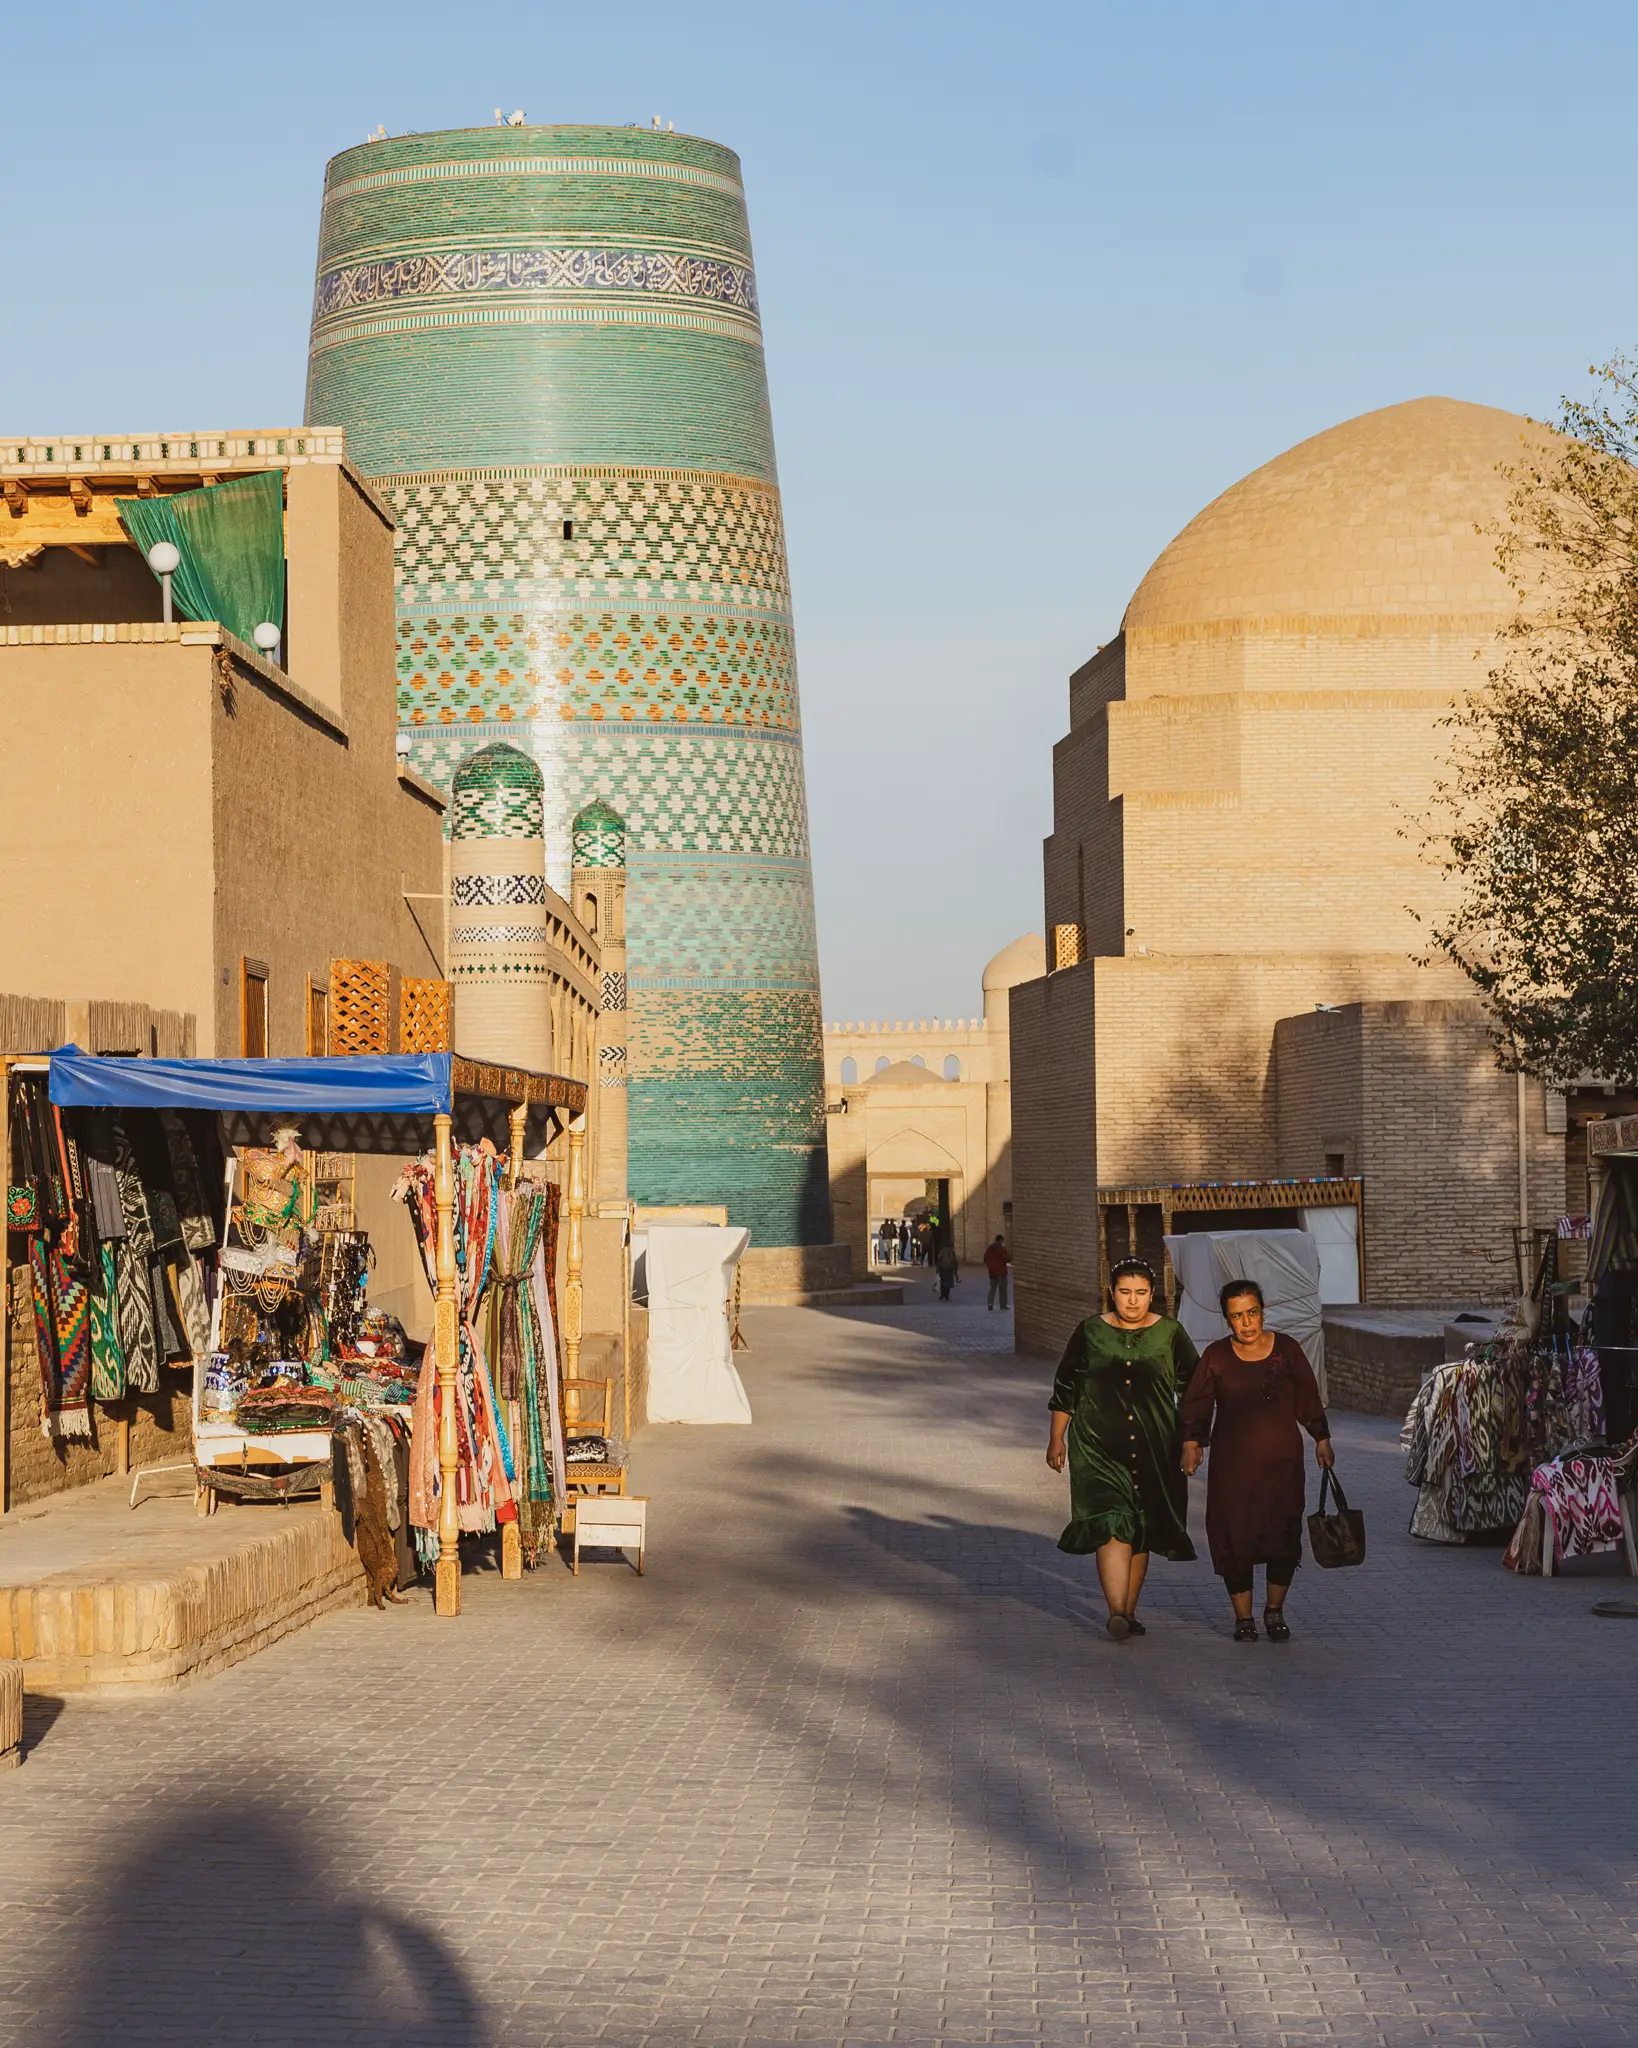 Be sure to wake up for sunrise when you're in Khiva